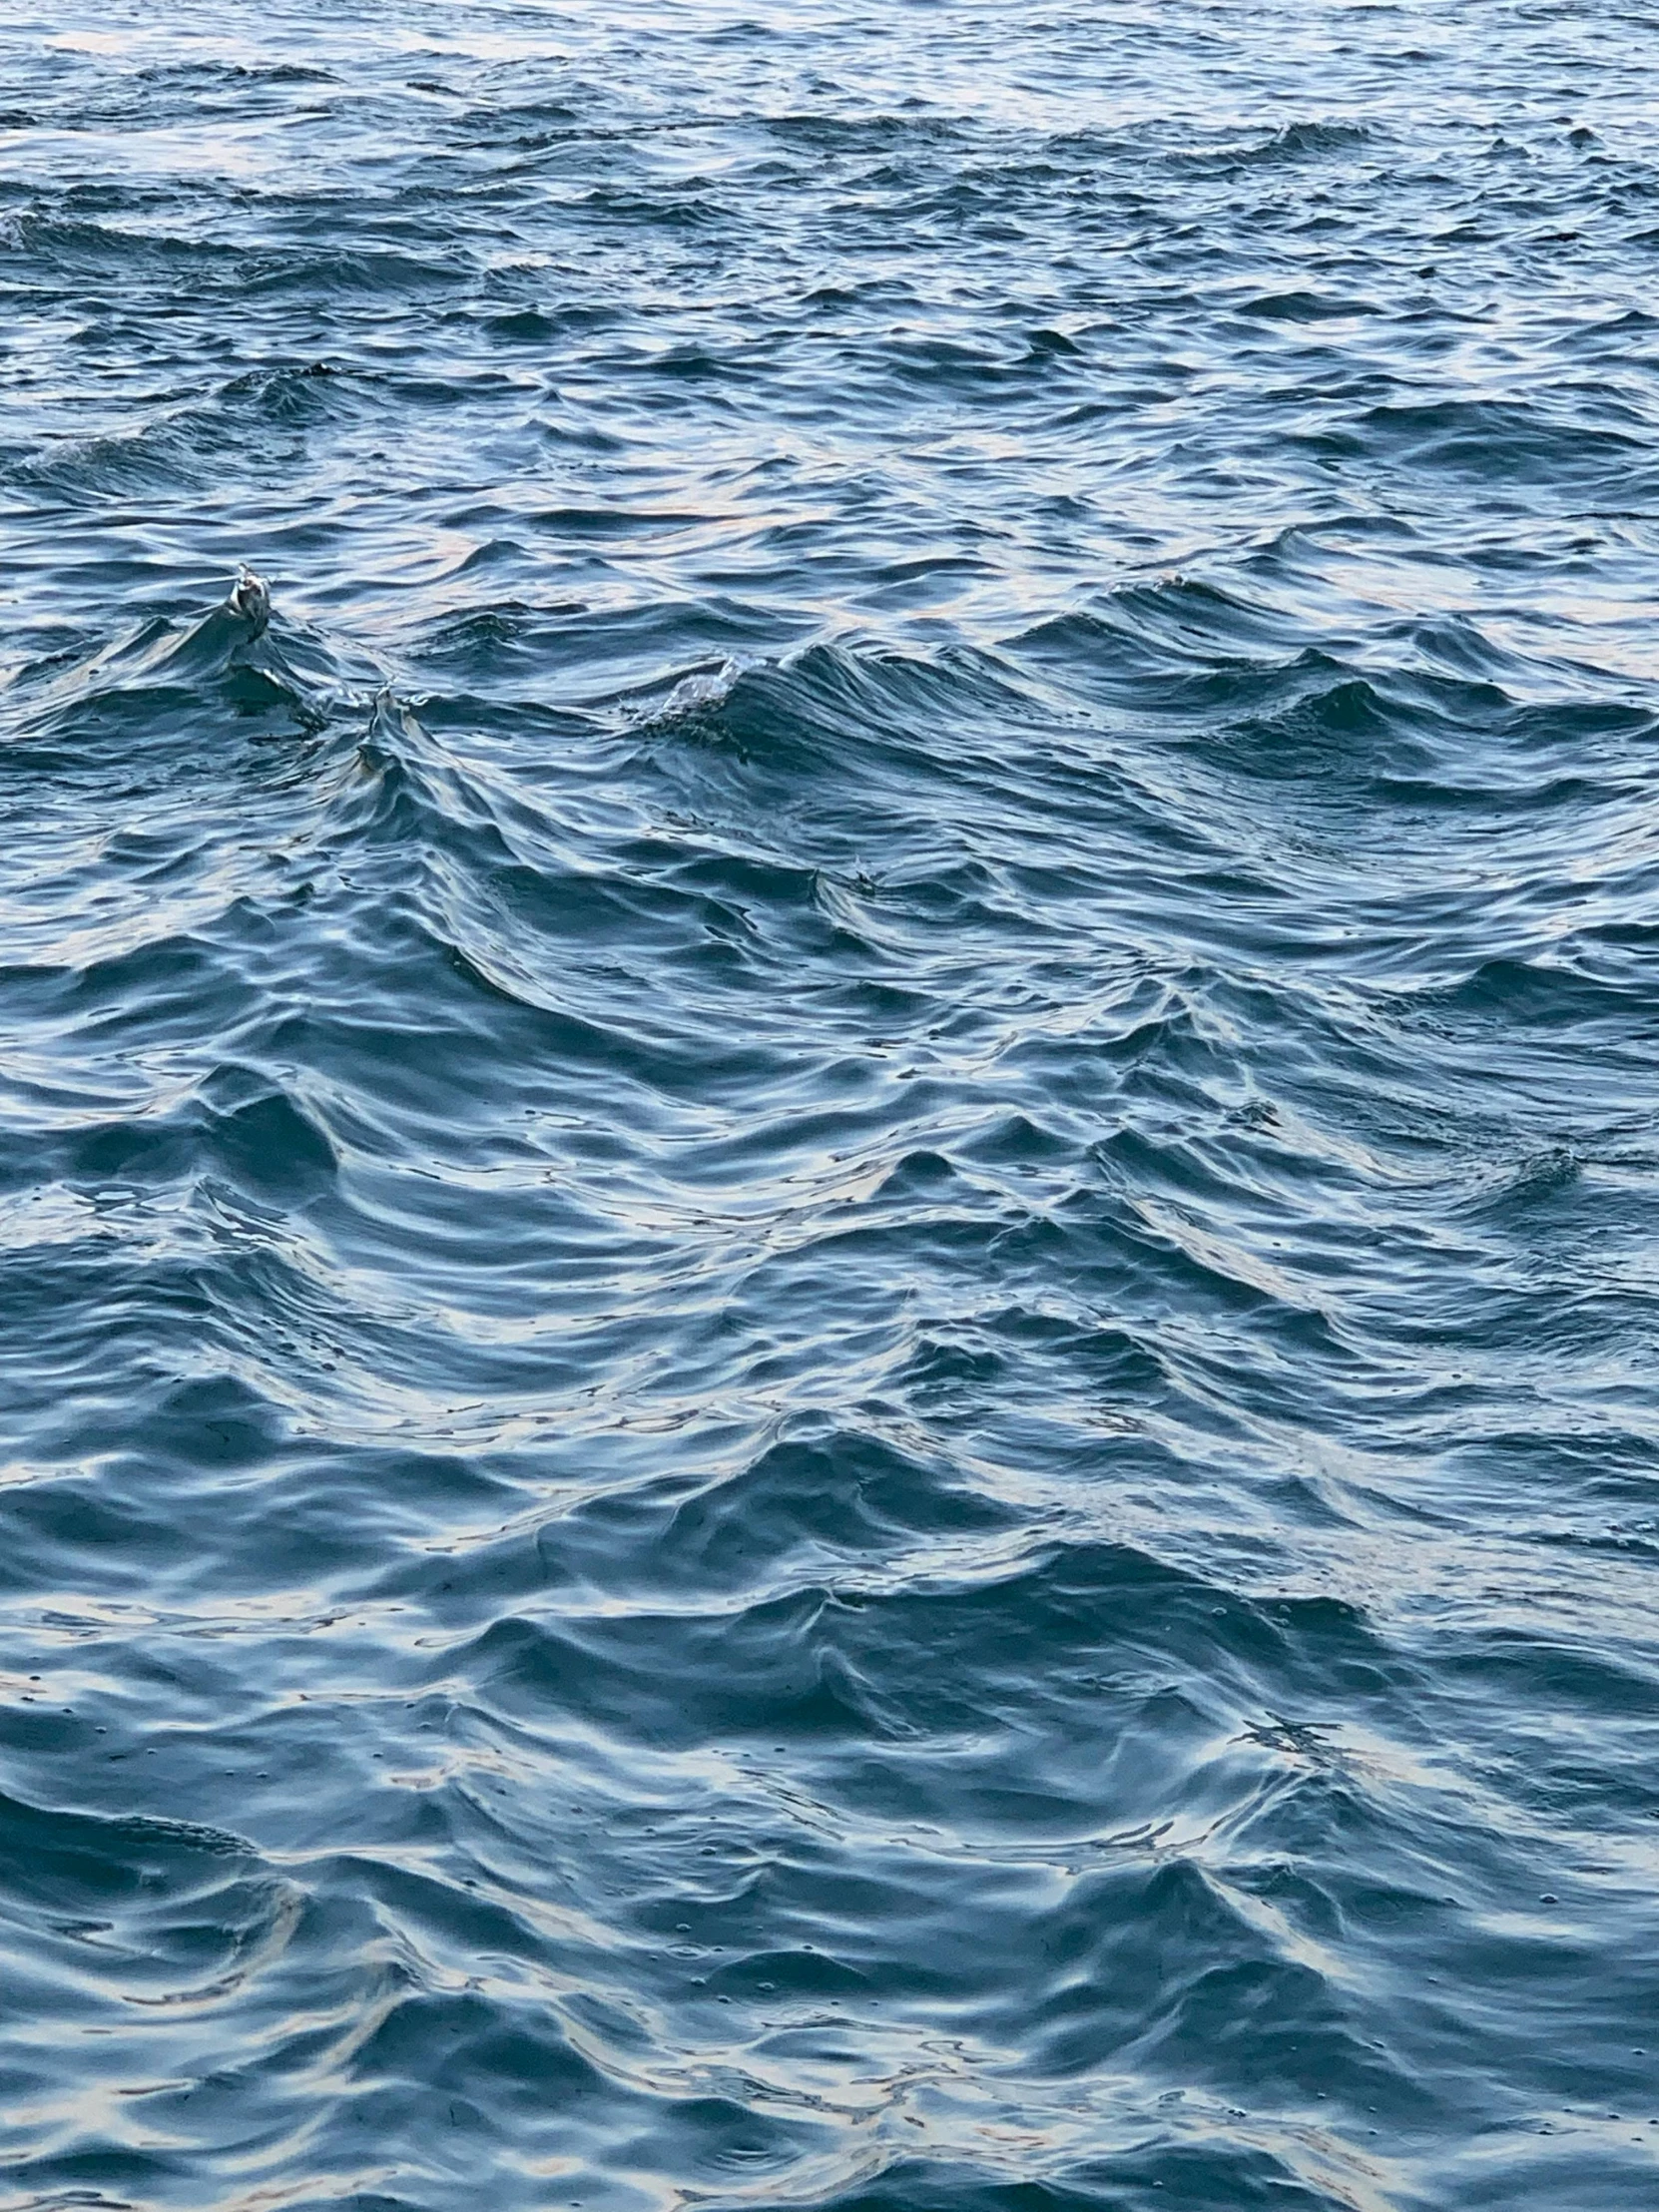 a close up of the water with large waves